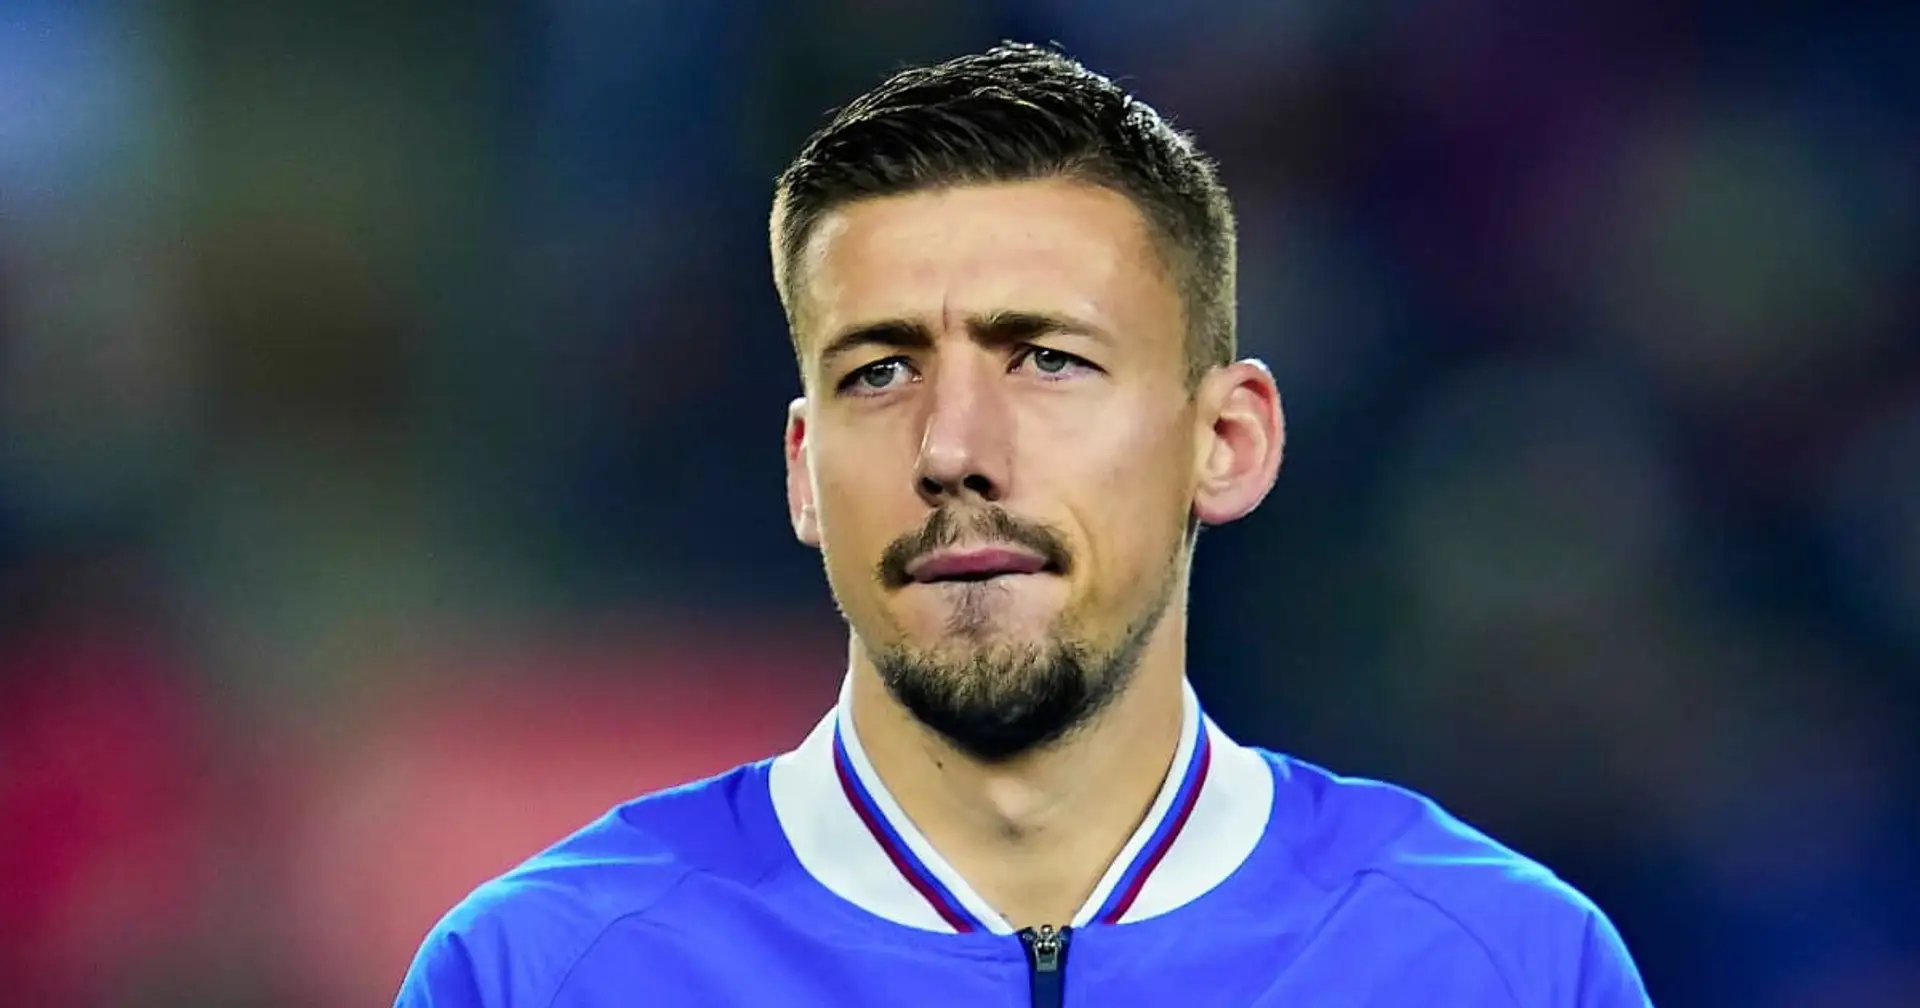 Lenglet has 2 offers to leave, player's stance revealed